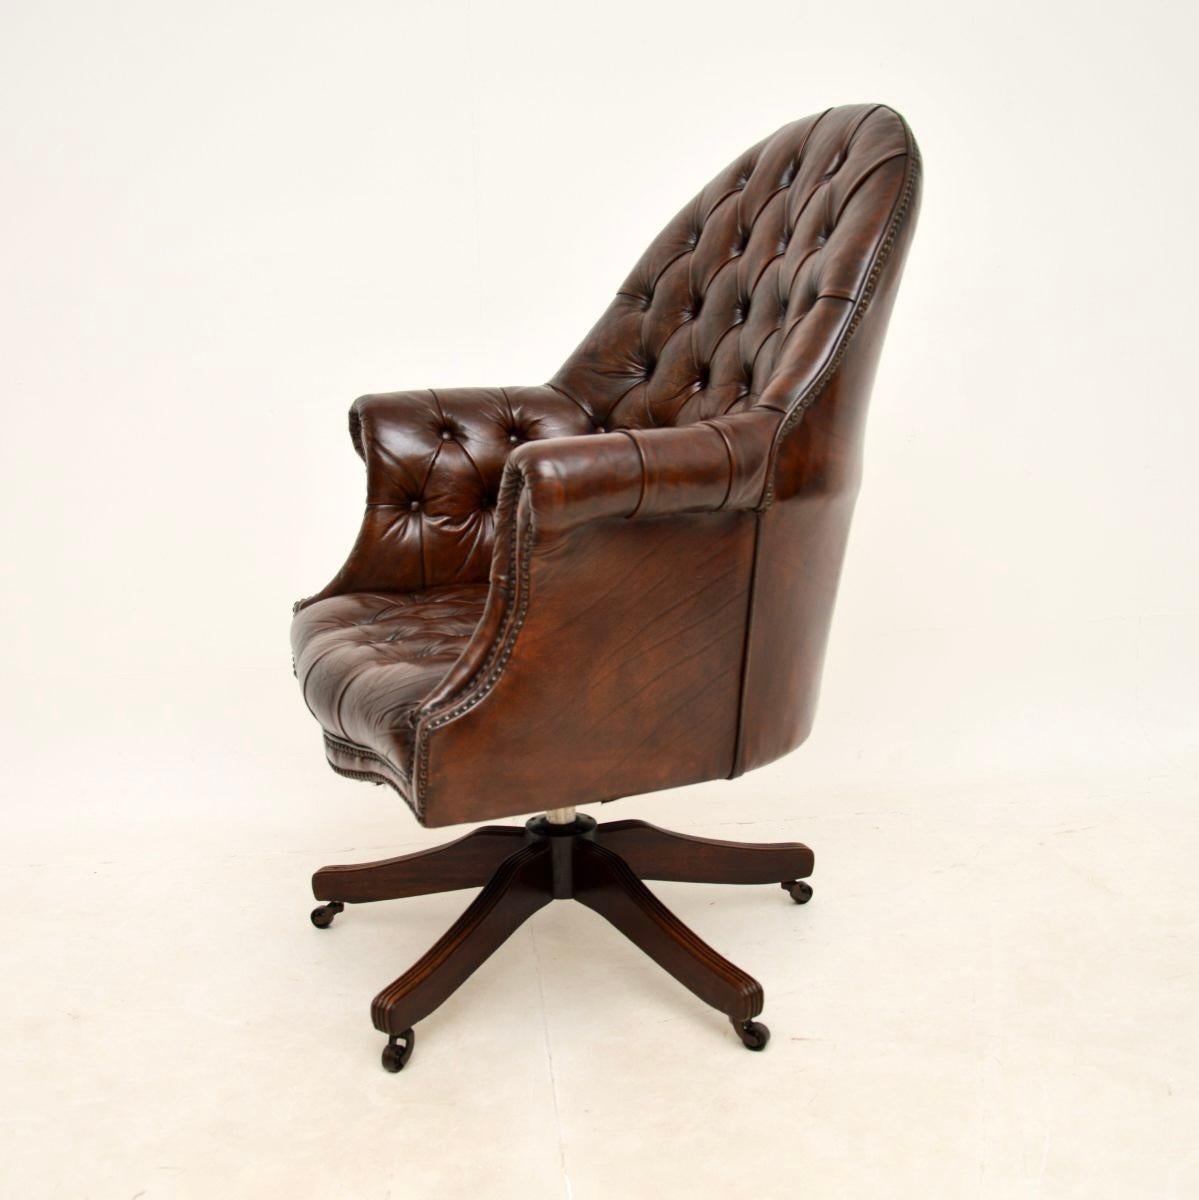 British Antique Victorian Style Leather Swivel Desk Chair For Sale